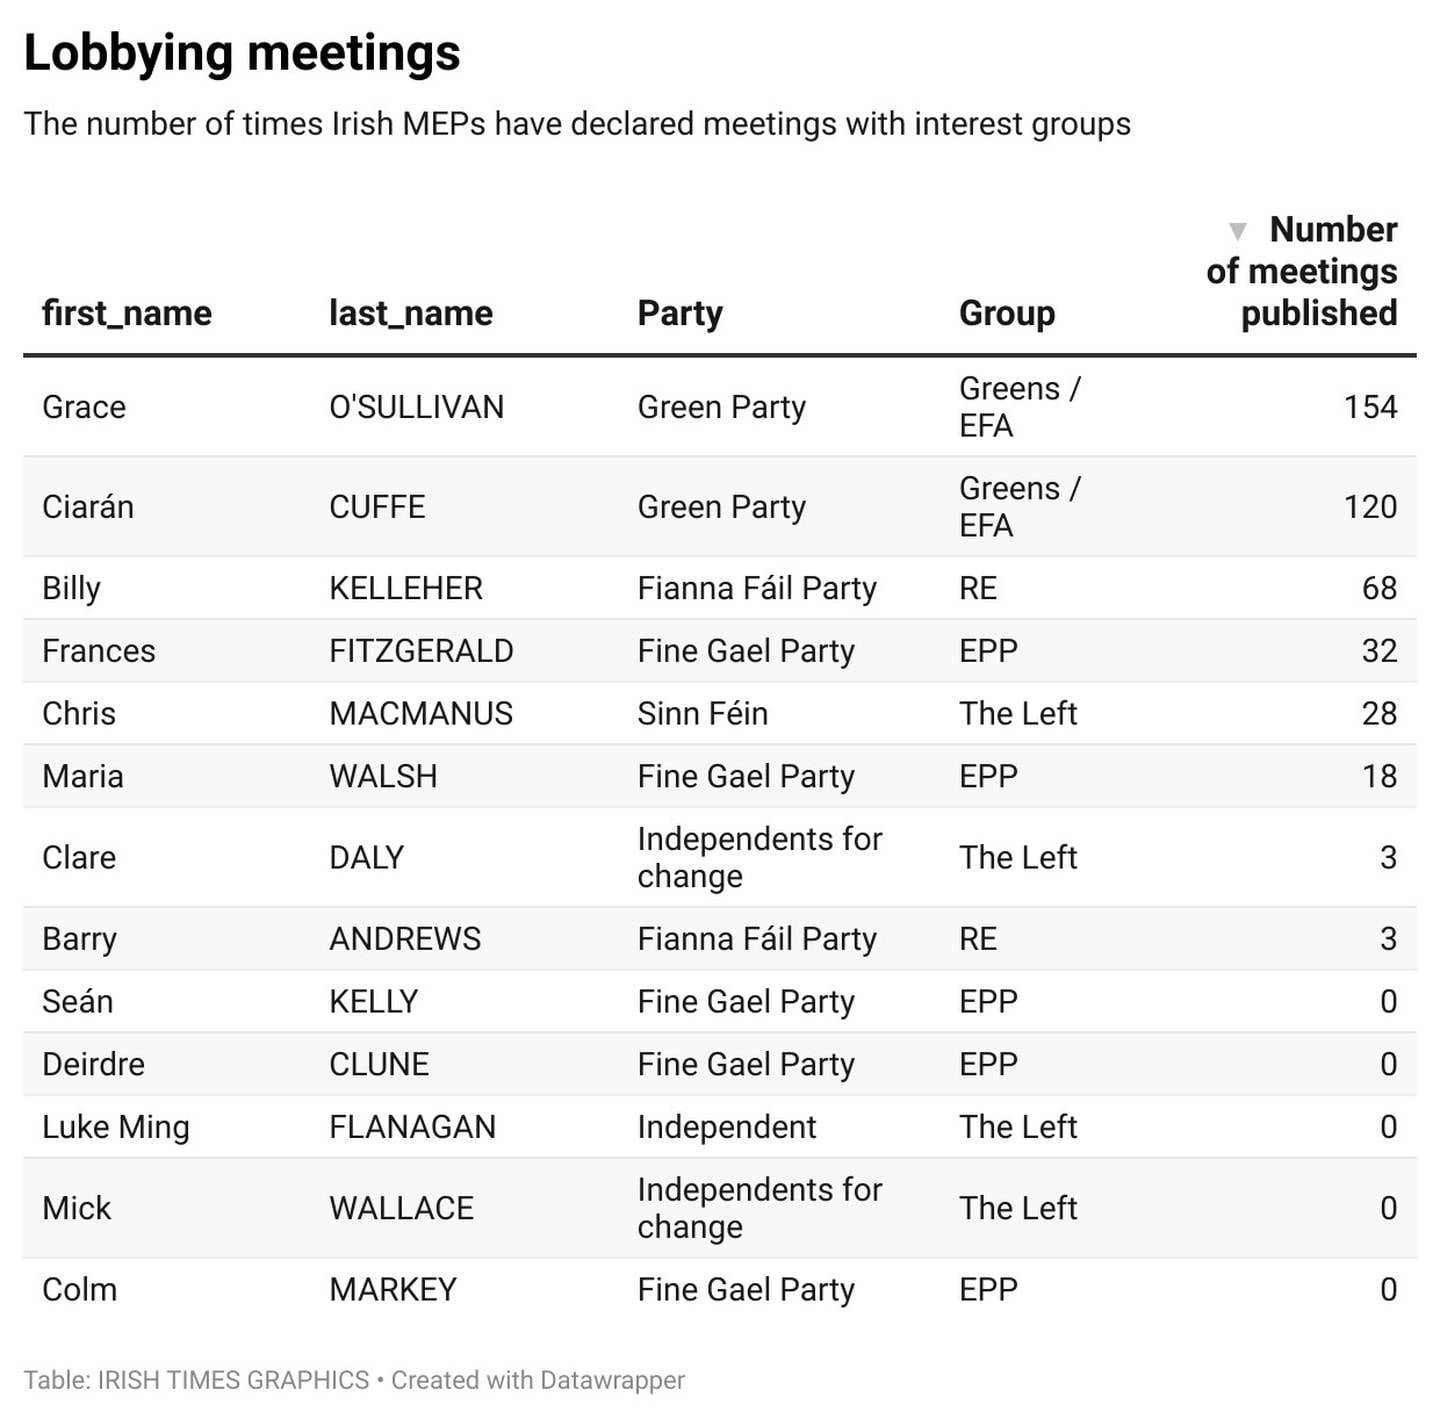 Graphic shows the number of lobbying meetings declared per Irish MEP, ranging from